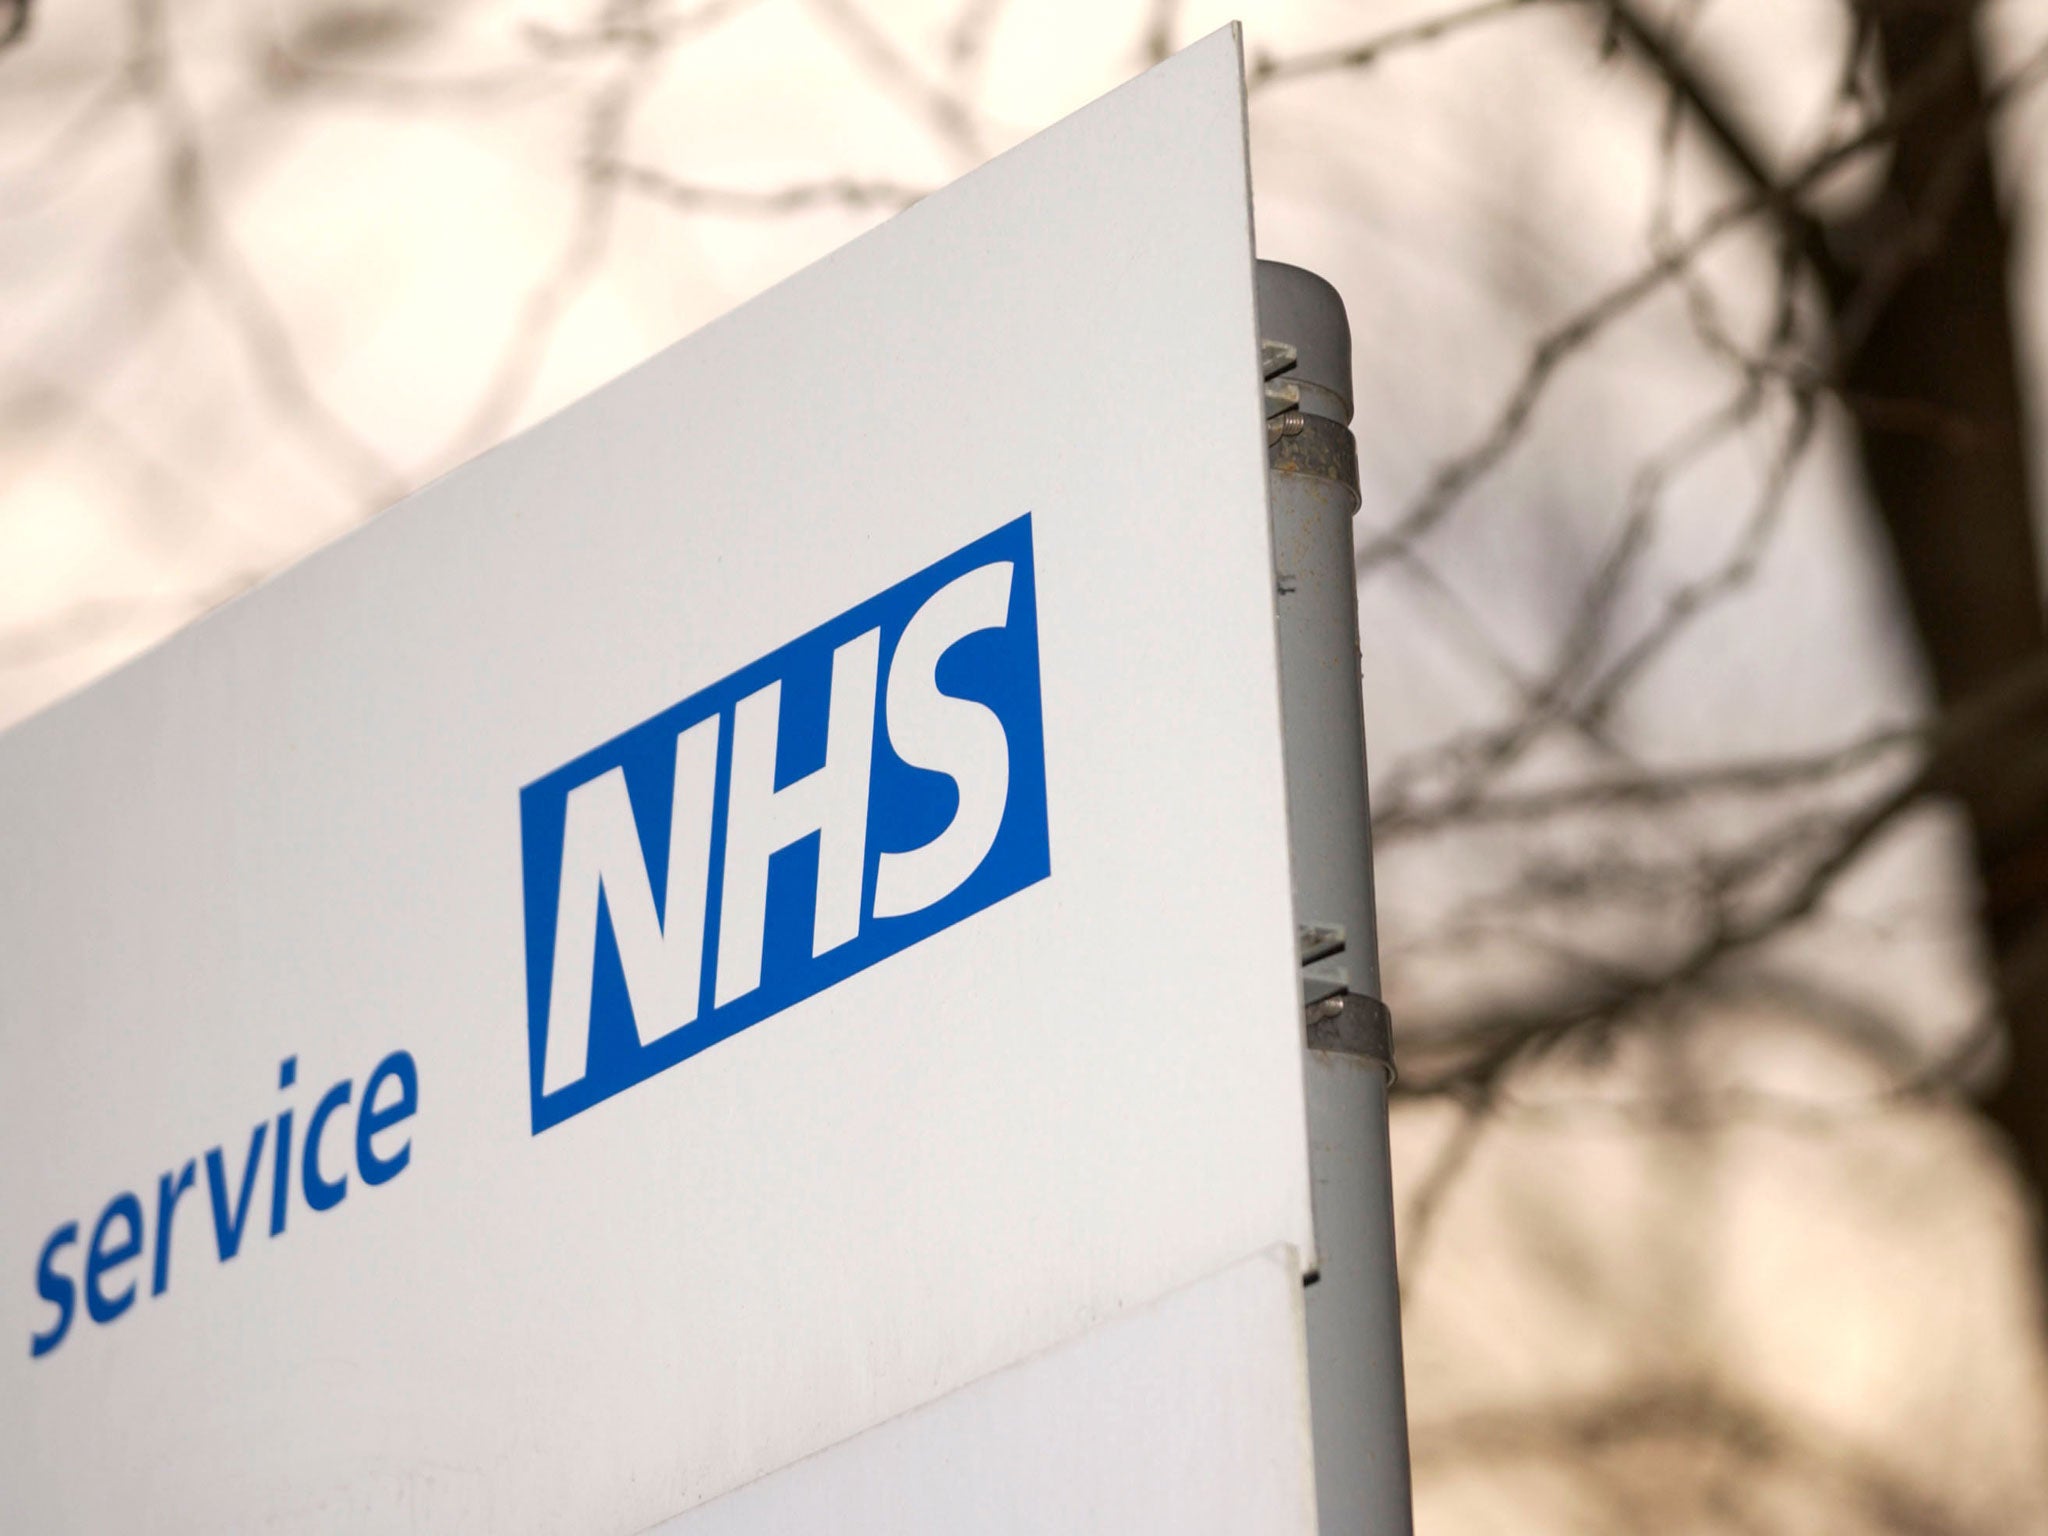 The leaders of 10 NHS organisations have called for an end to waves of criticism of the health service